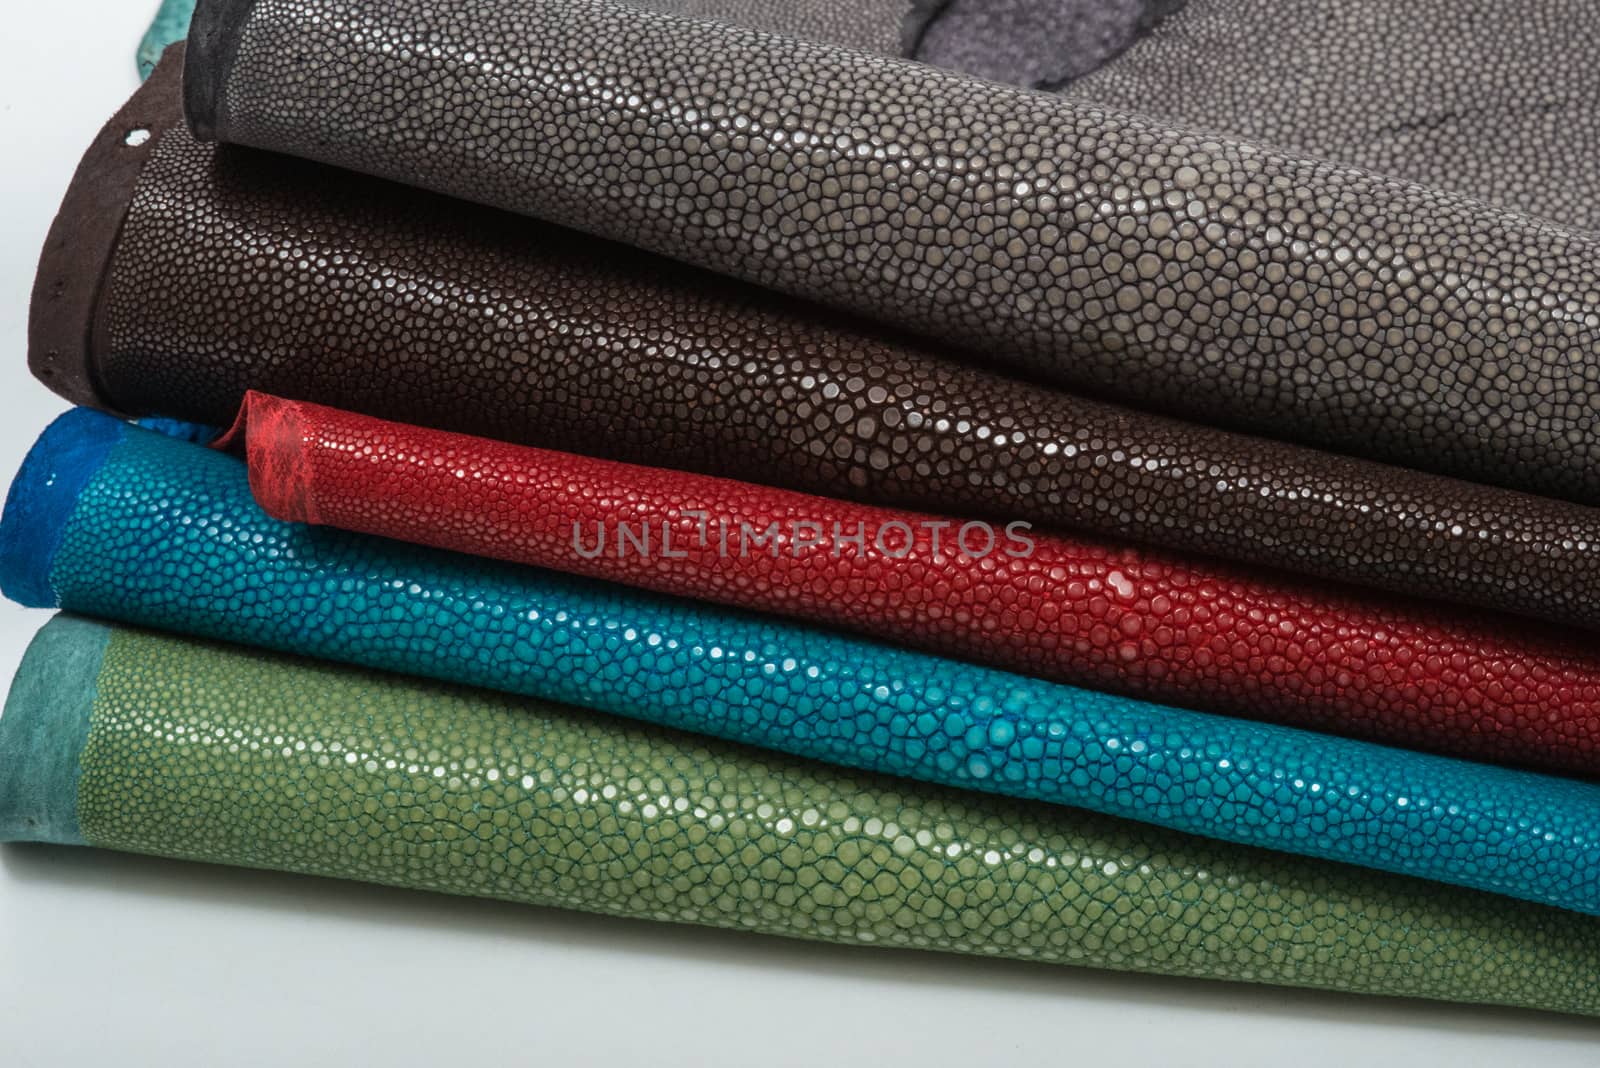 Stingray exotic leather, hide, skins in 5 colors